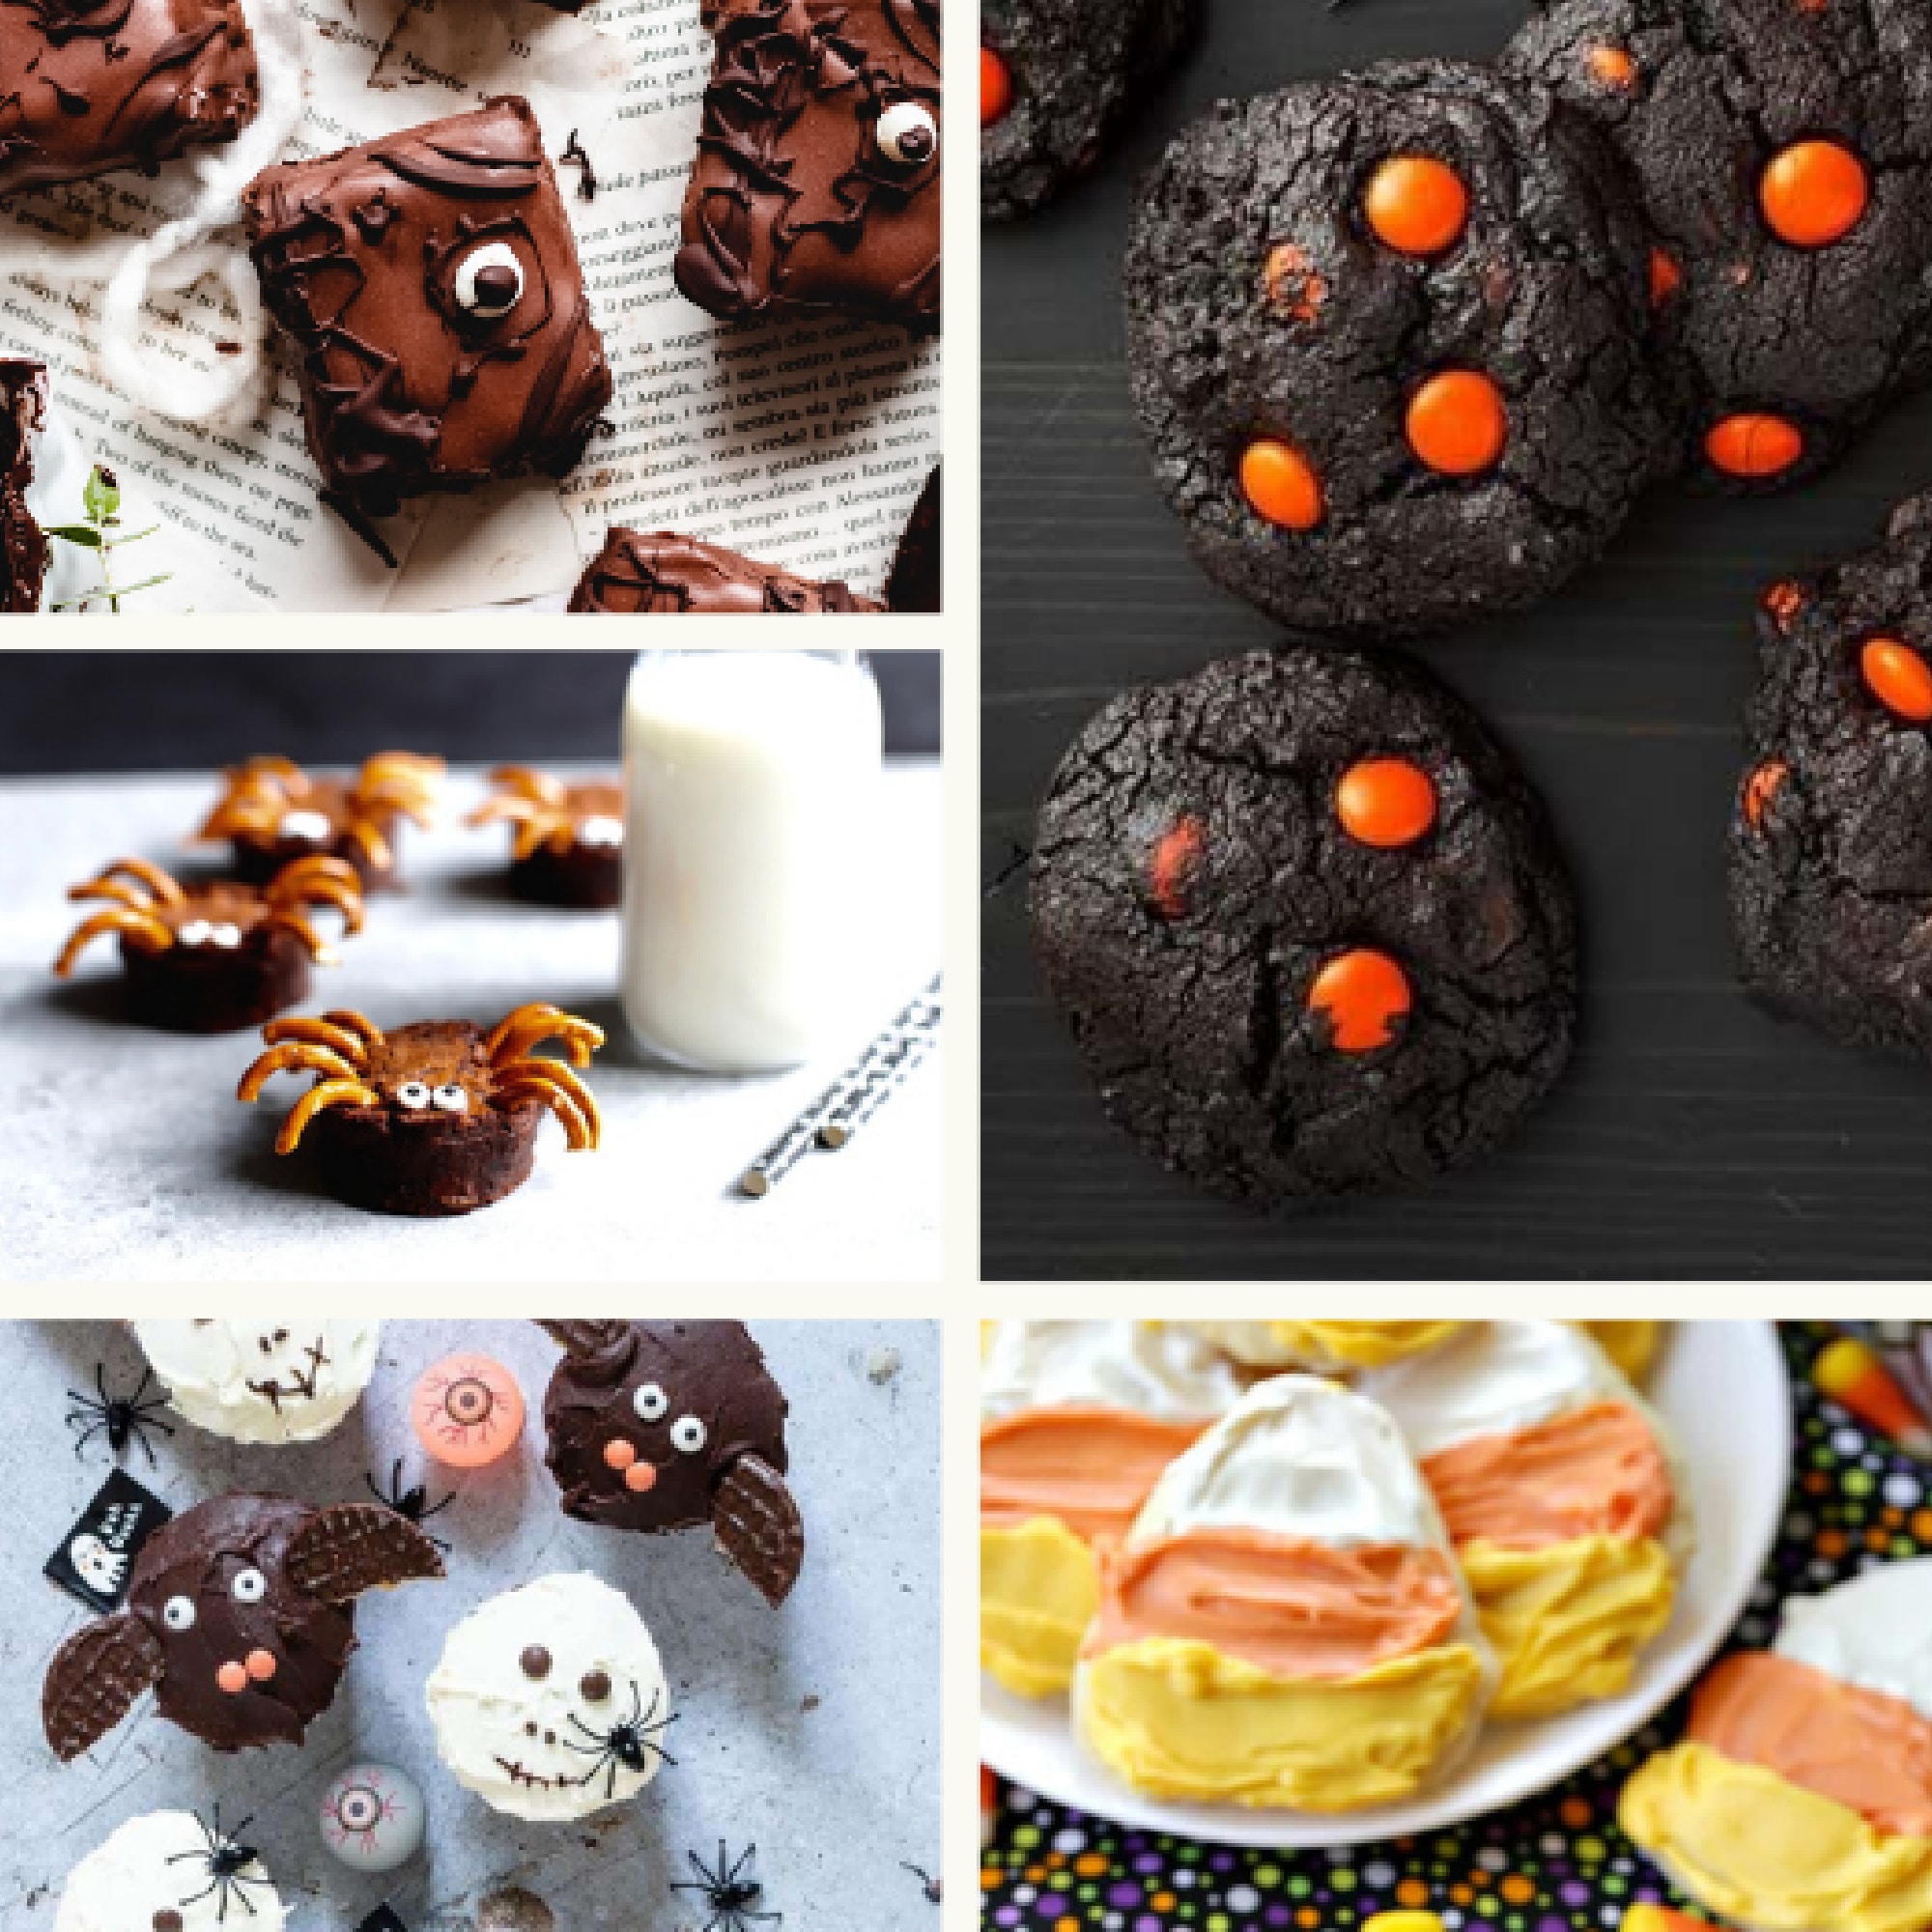 15 Halloween Recipes to Bake with Your Kids